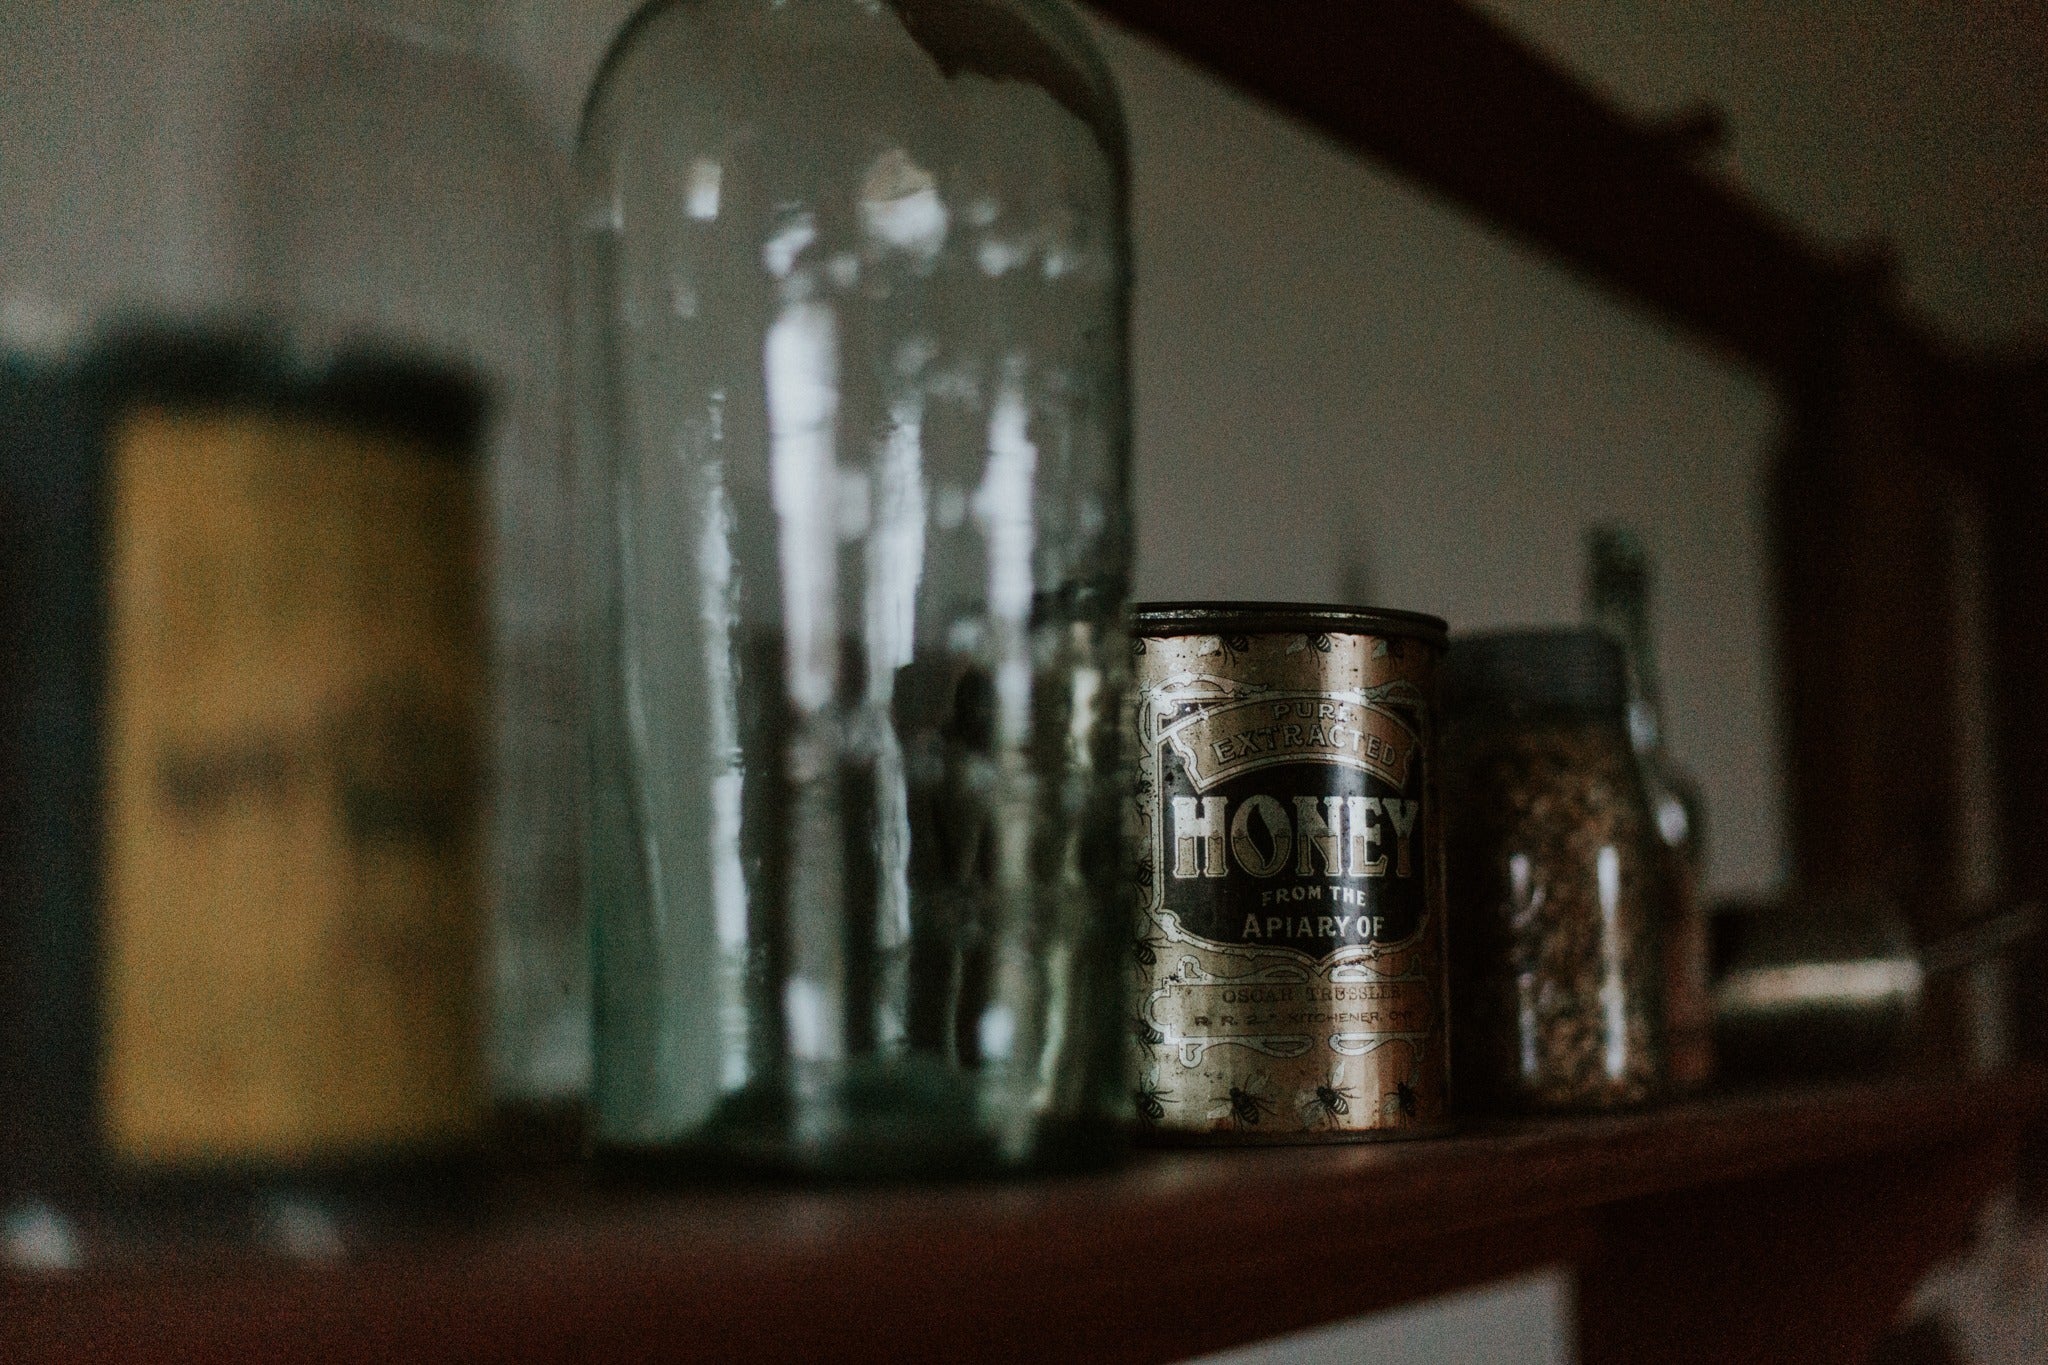 A shelf holds a tall glass bottle, and an old silver tin.